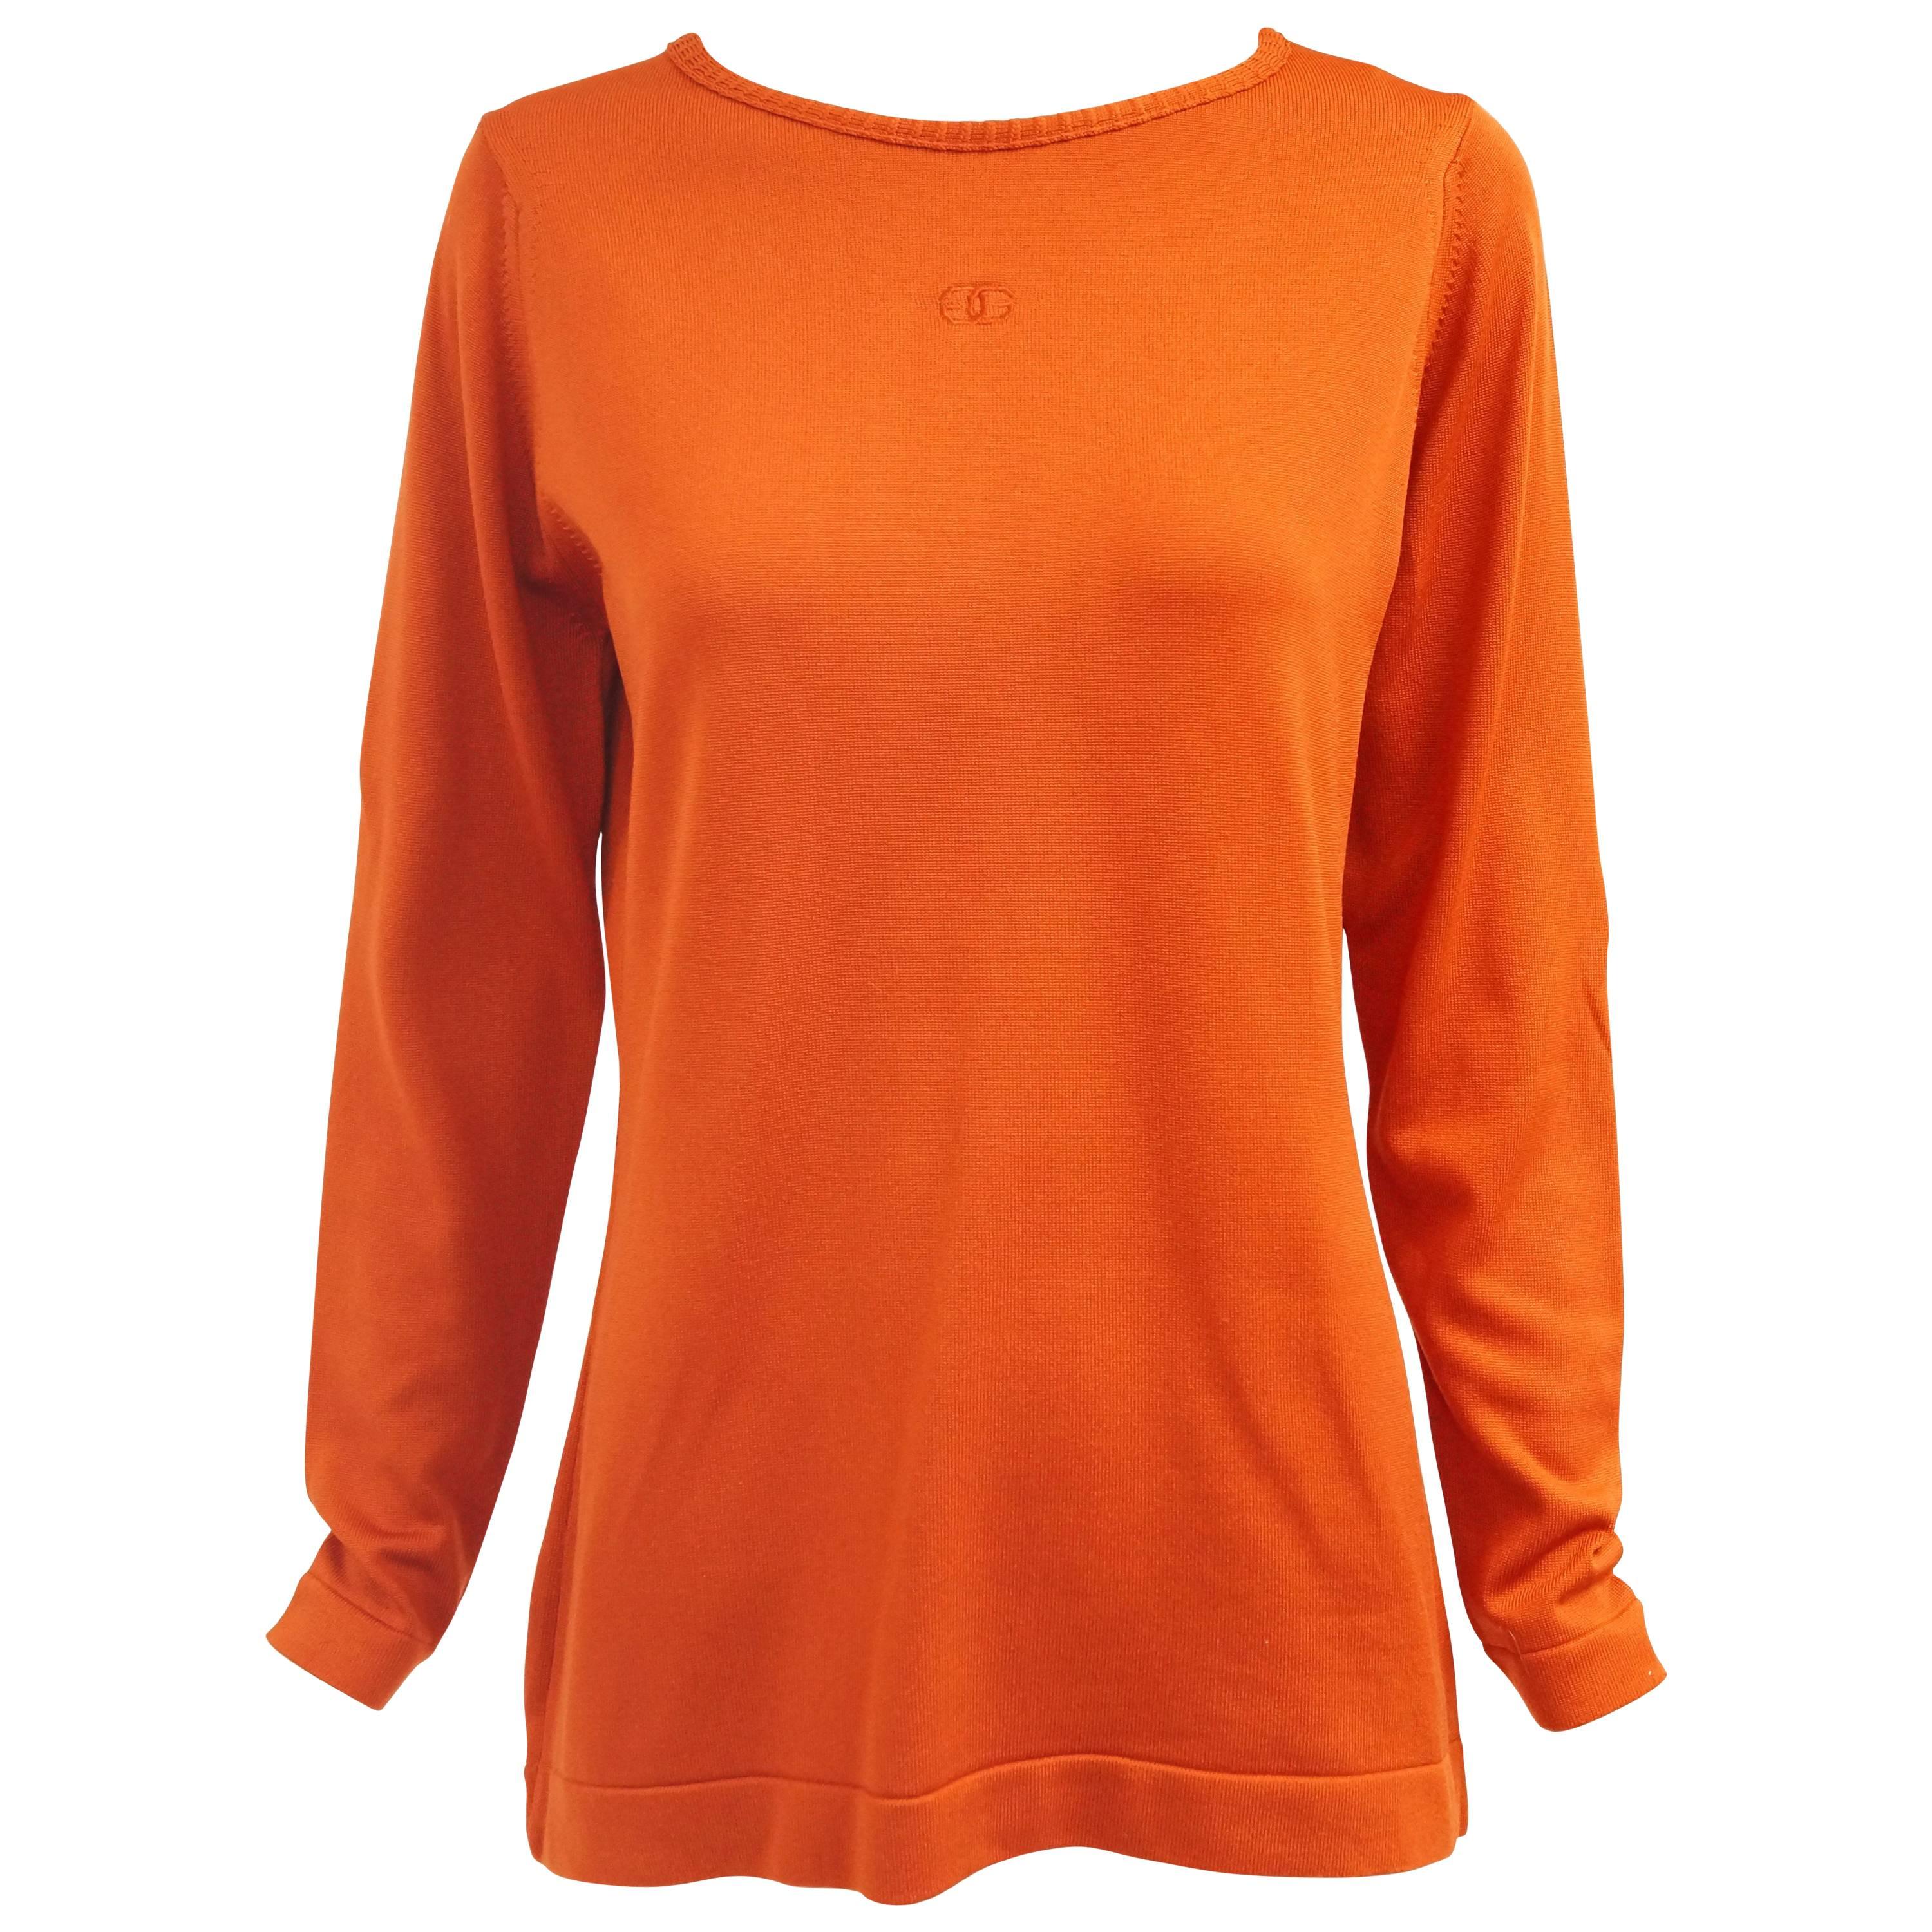 Givenchy Sport Tangerine Orange Pullover Sweater, 1970s 